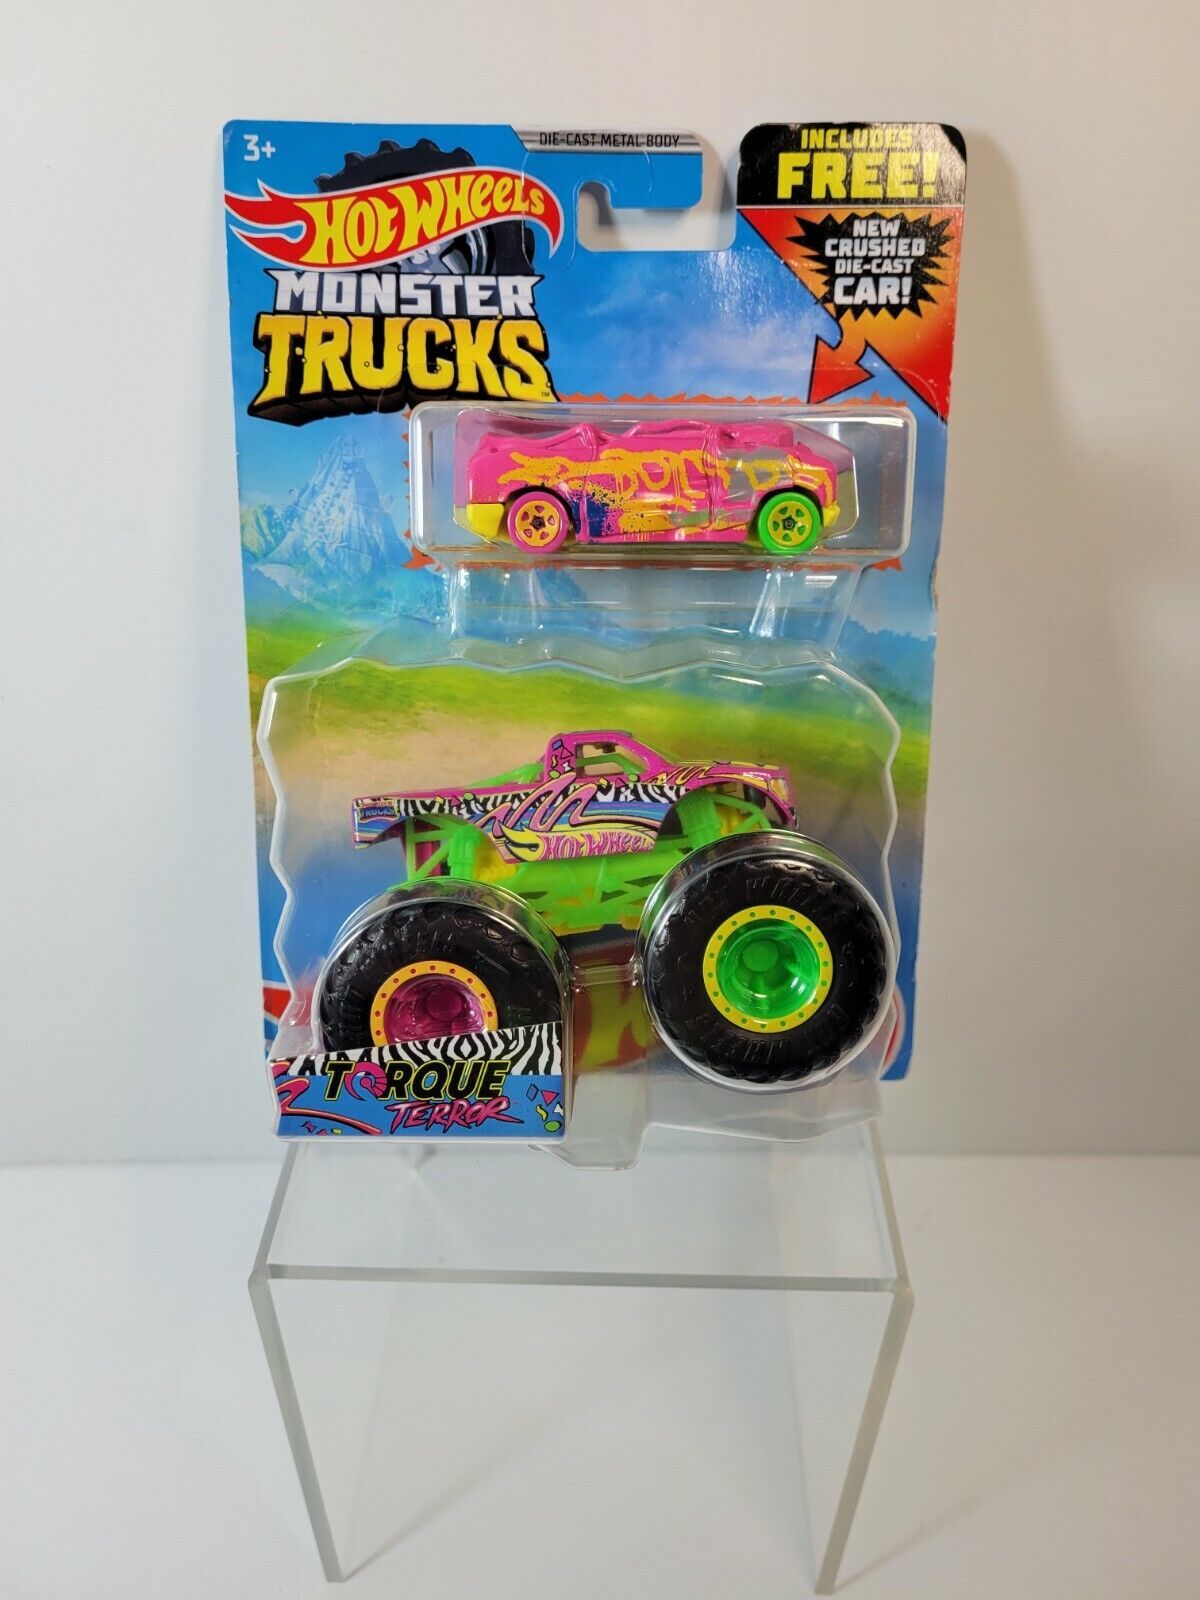 Primary image for Hot Wheels Monster Trucks Torque Terror And Crushed Van Blind Sided (BBGYL89)